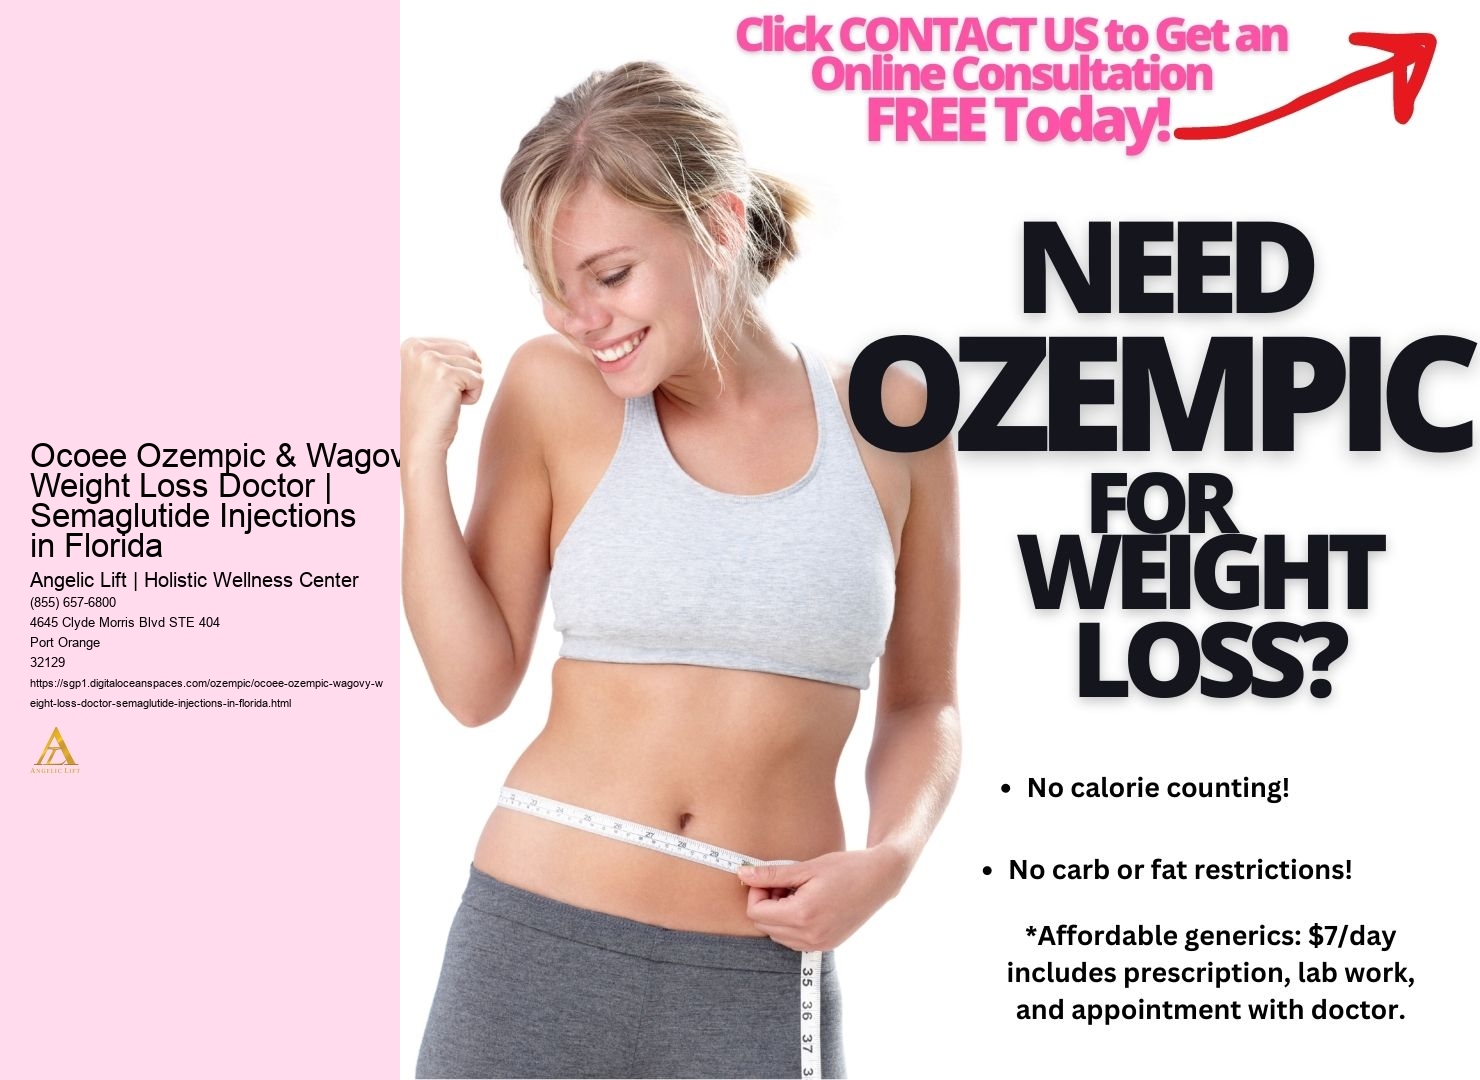 Ocoee Ozempic & Wagovy Weight Loss Doctor | Semaglutide Injections in Florida